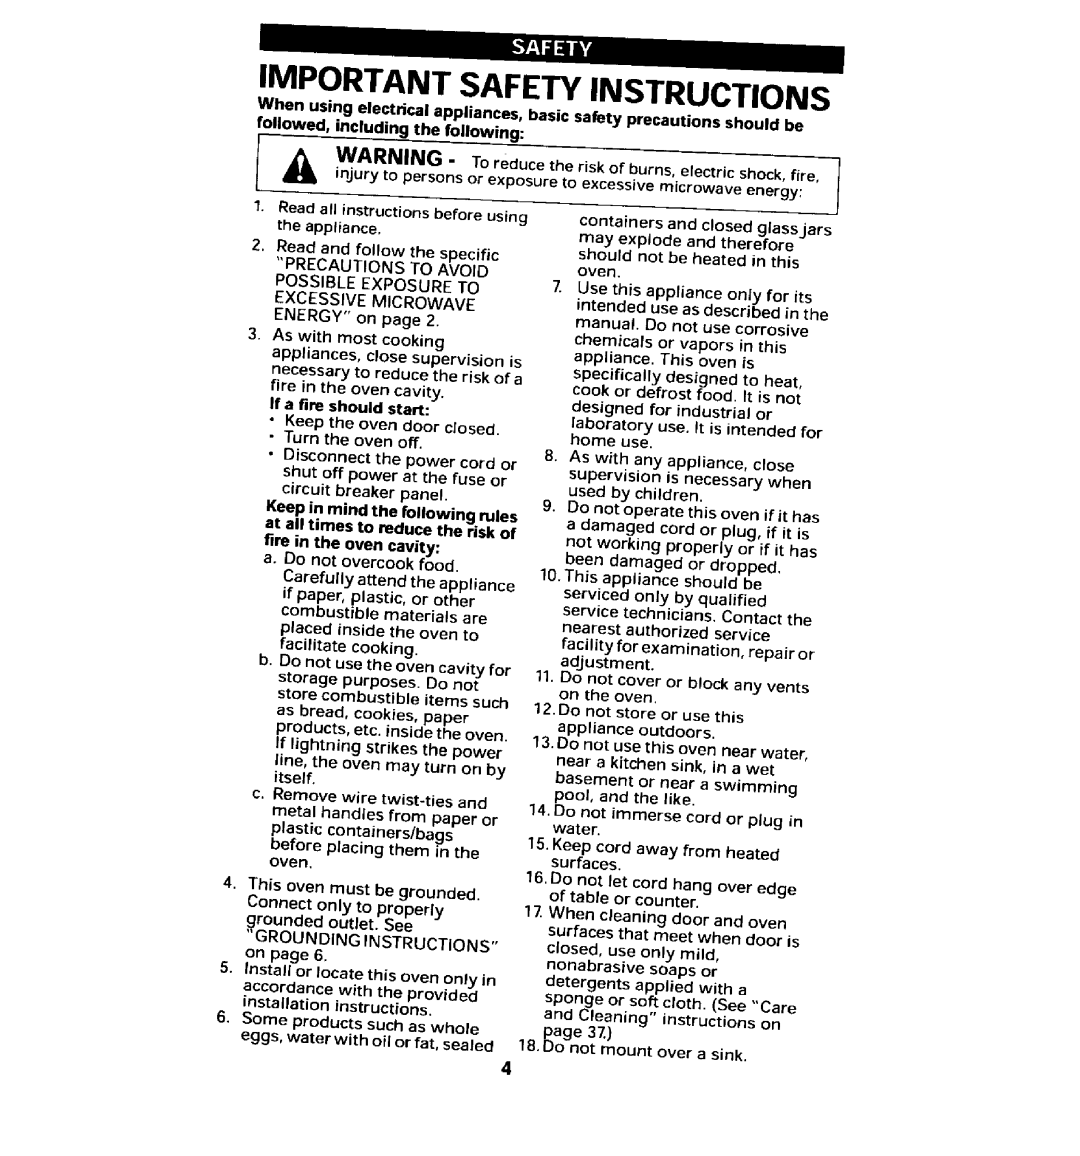 Maytag MMV5100AA manual Readall instructions before using the appliance, Keep the oven door closed Turn the oven off, Afety 